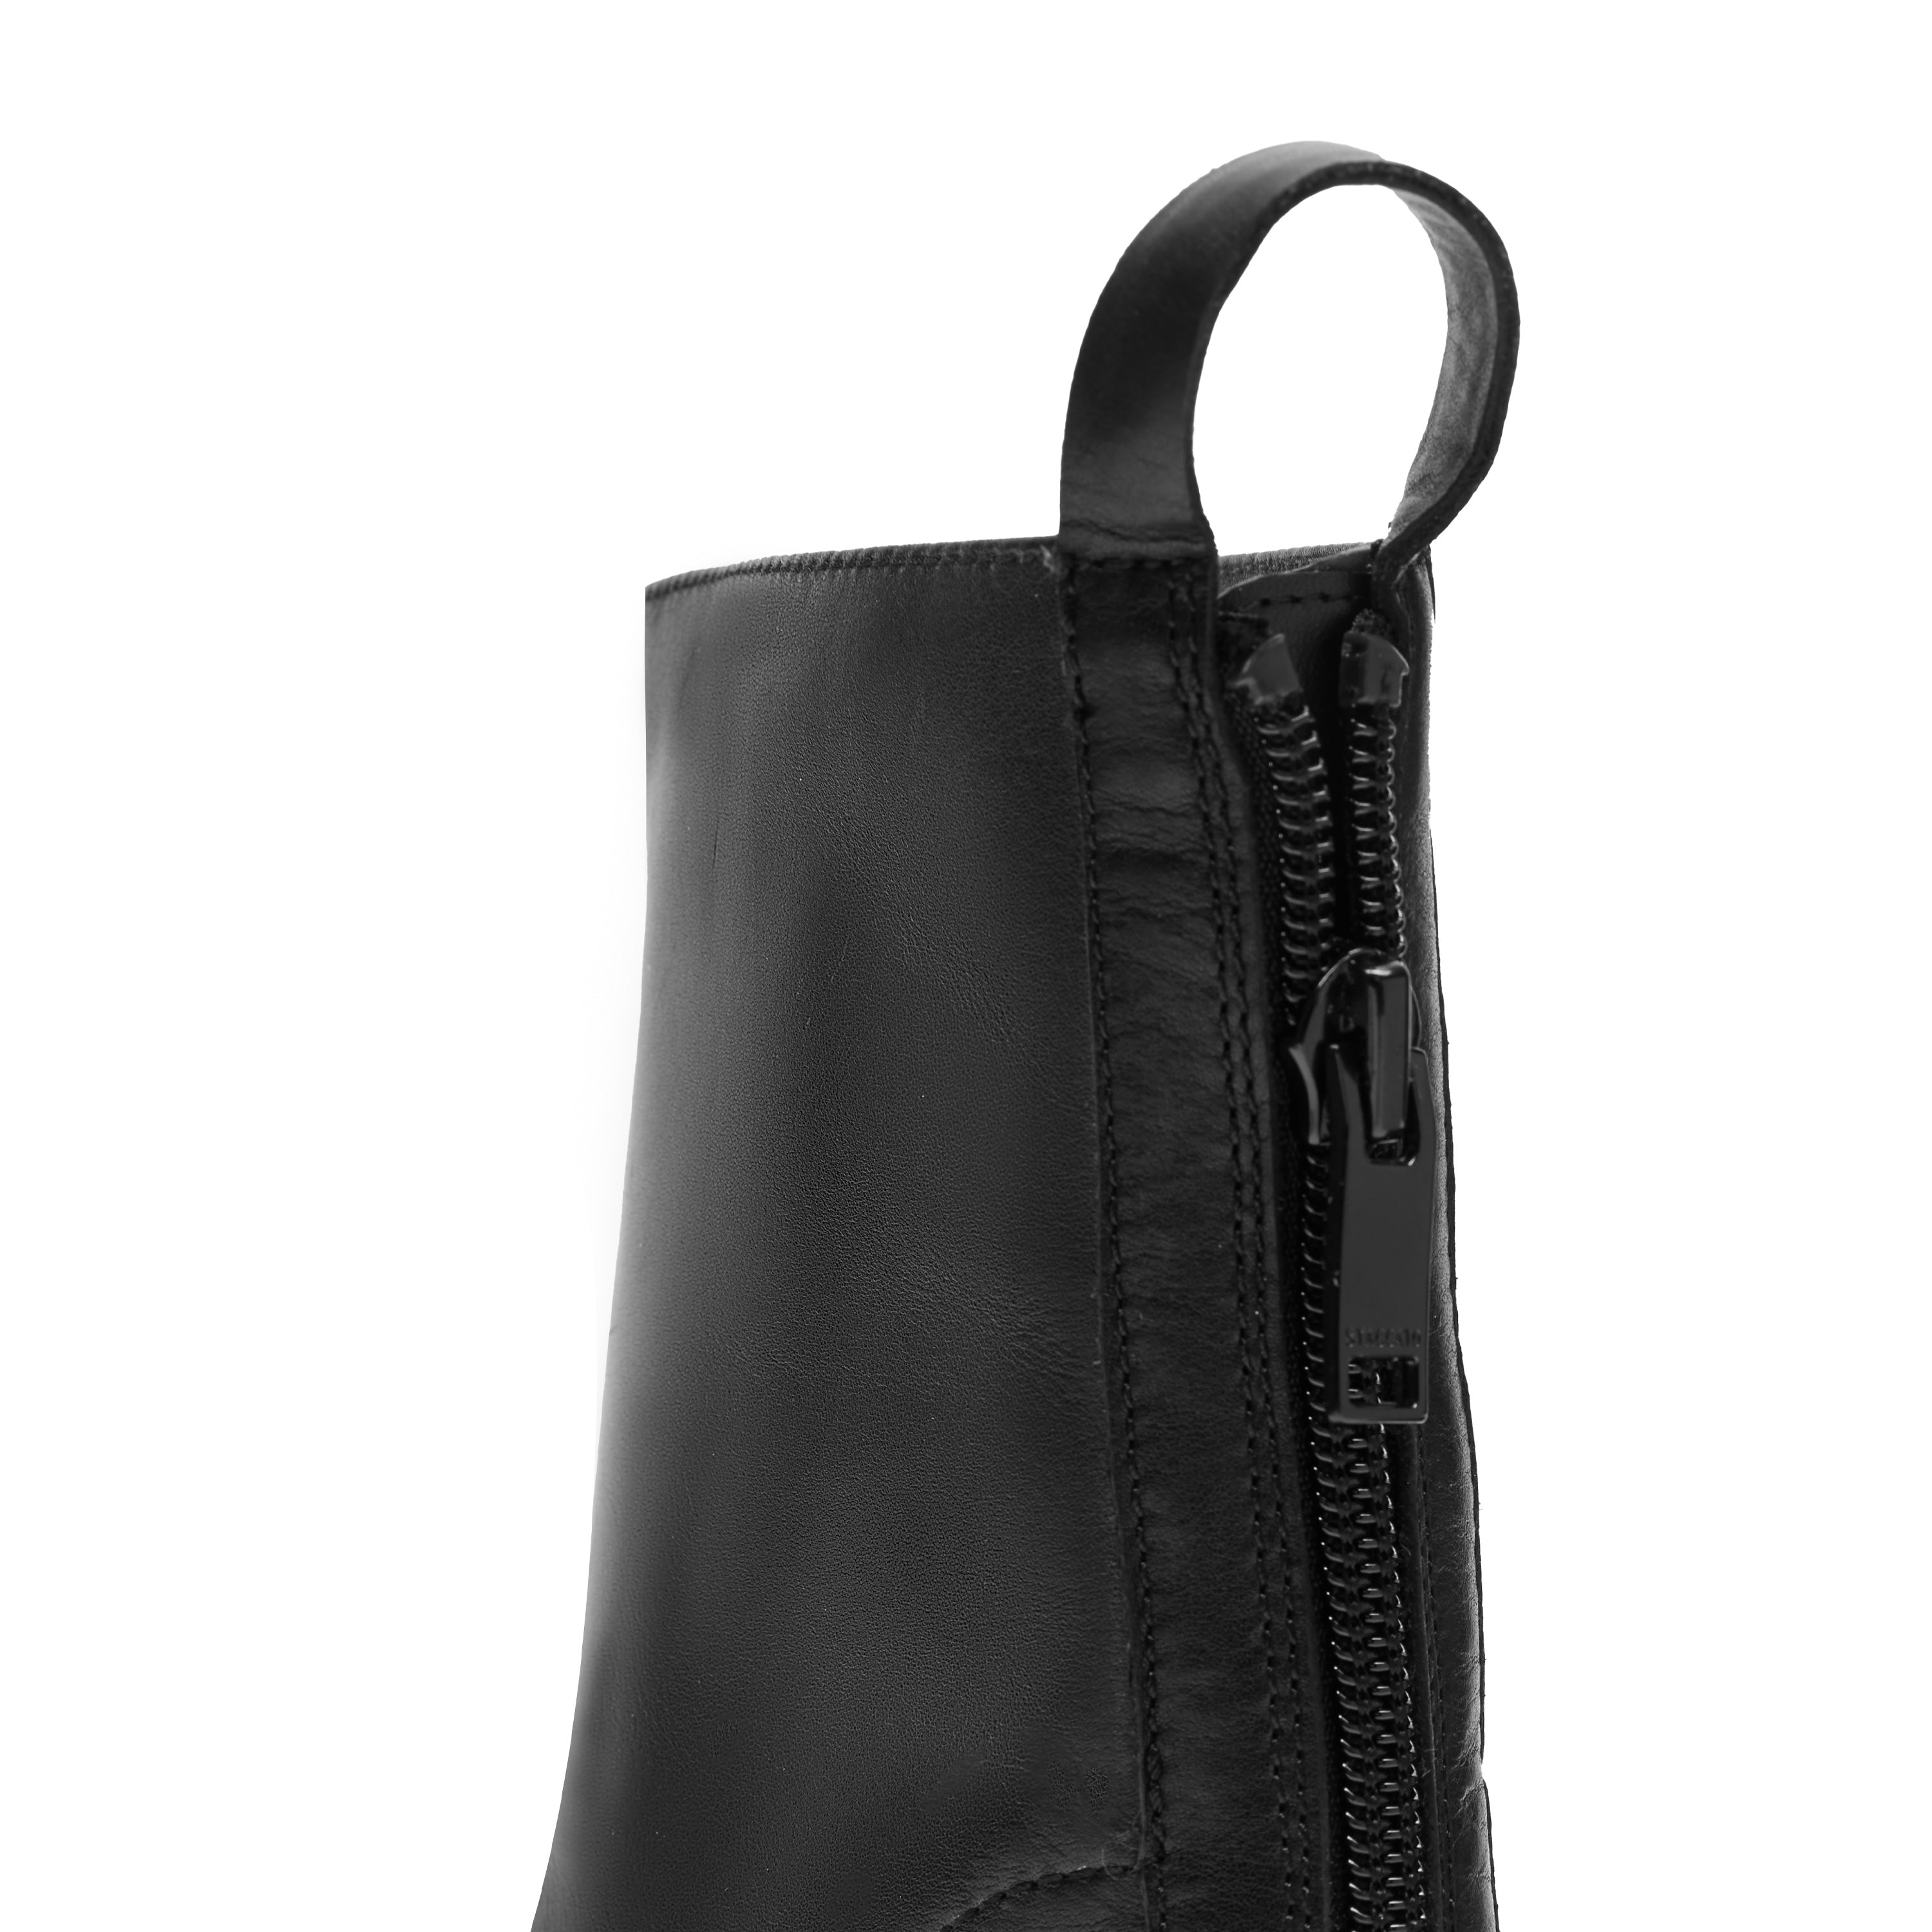 Black Waxy Square Toe Ankle Boots